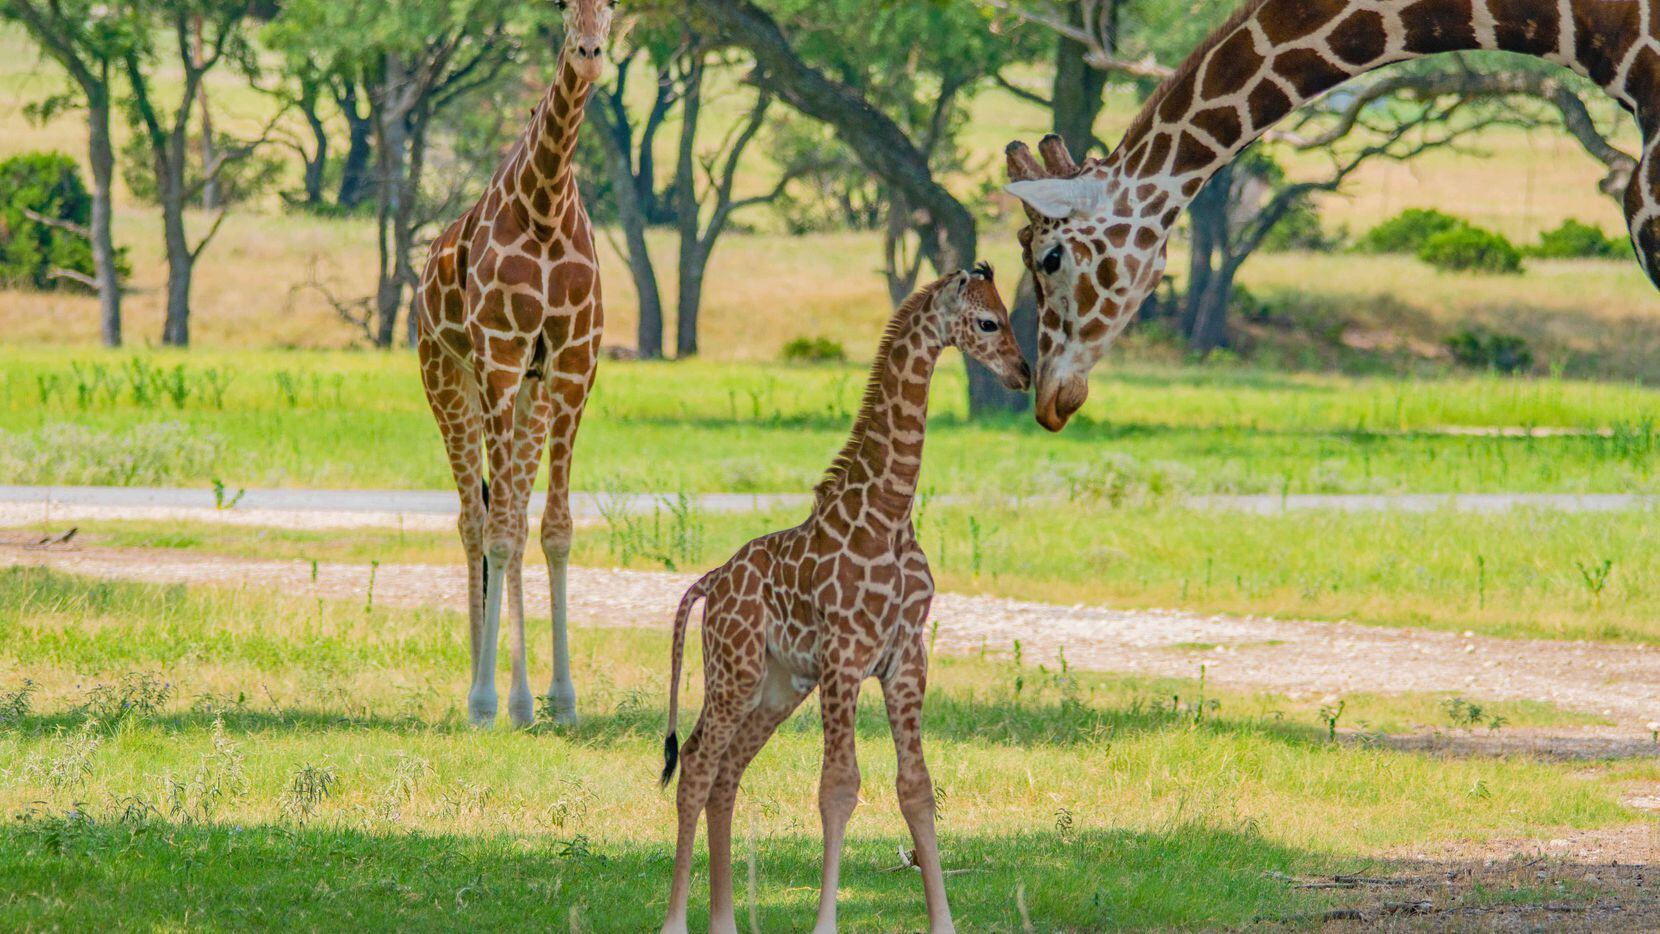 Just try not to smile: See the cute newborn giraffe at Fossil Rim Wildlife  Center